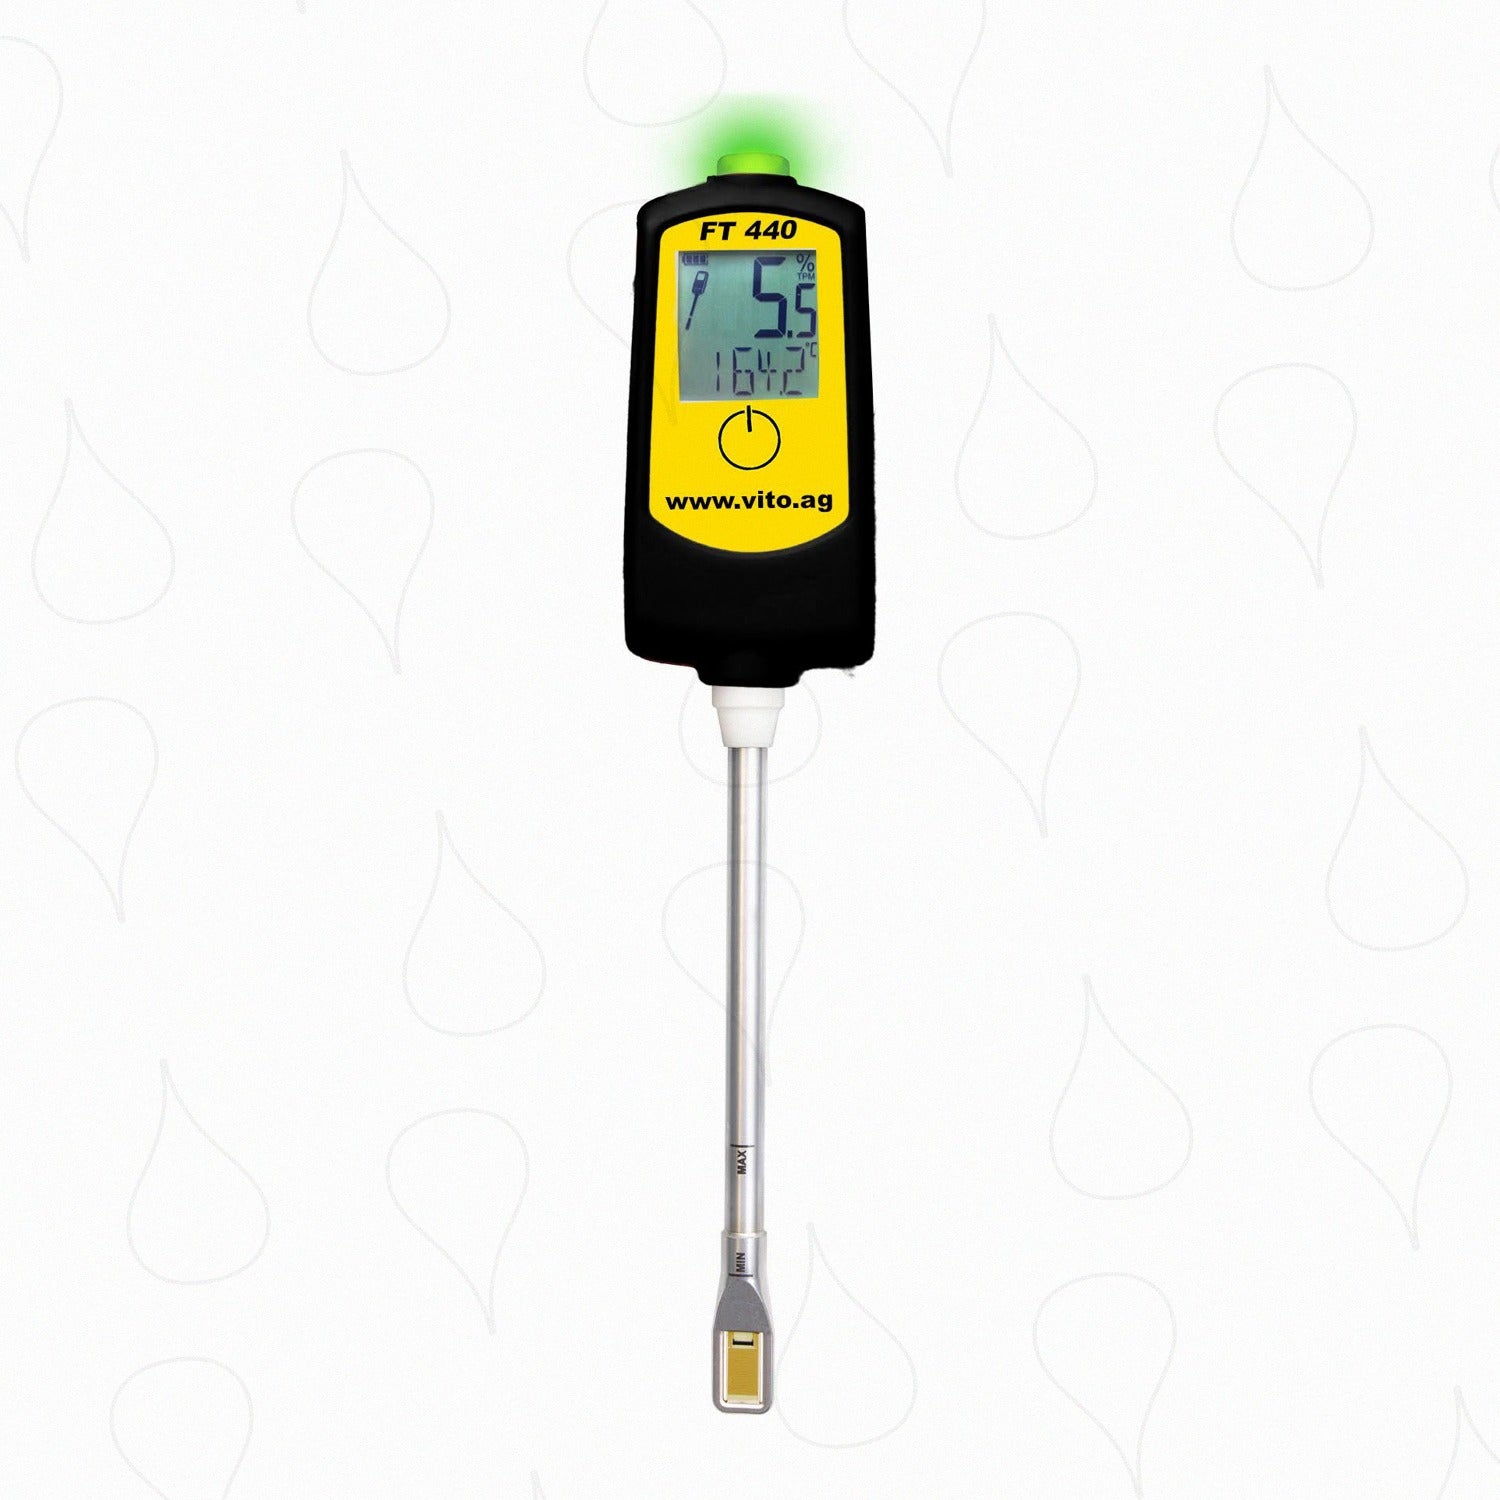 The FT 440 determines the temperature and the quality of your frying oil. Measuring the "Total Polar Material" (TPM) content in the oil, the tester gives you an accurate overview of the quality of your frying medium in a percentage value. The FT 440 comes with a top light which works after the traffic light principle and gives clear warning when it is time to dispose your fat. Never change your oil too early or too late again